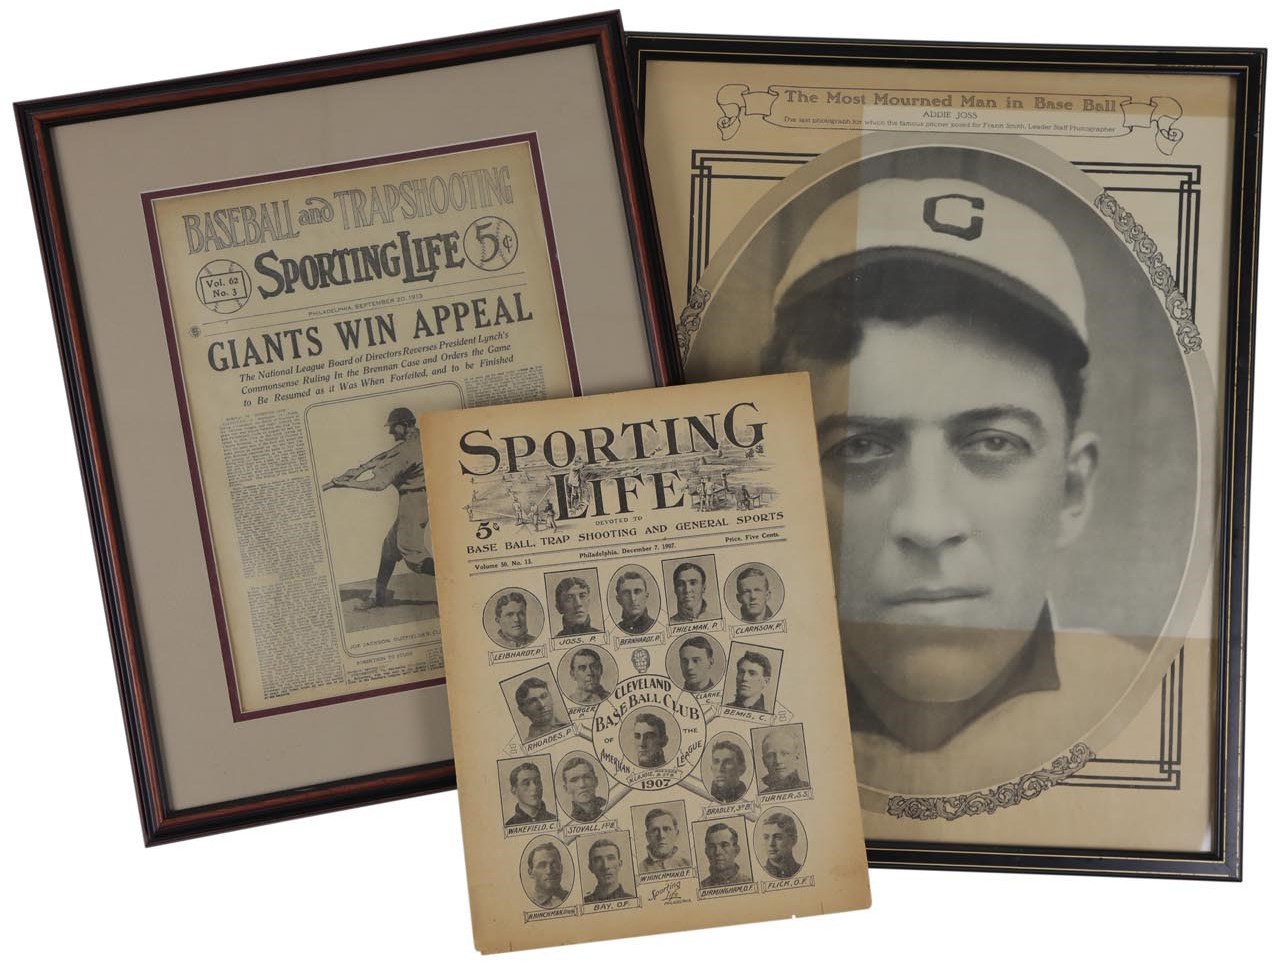 Three Cleveland Indians Publications With Shoeless Joe Jackson and Addie Joss